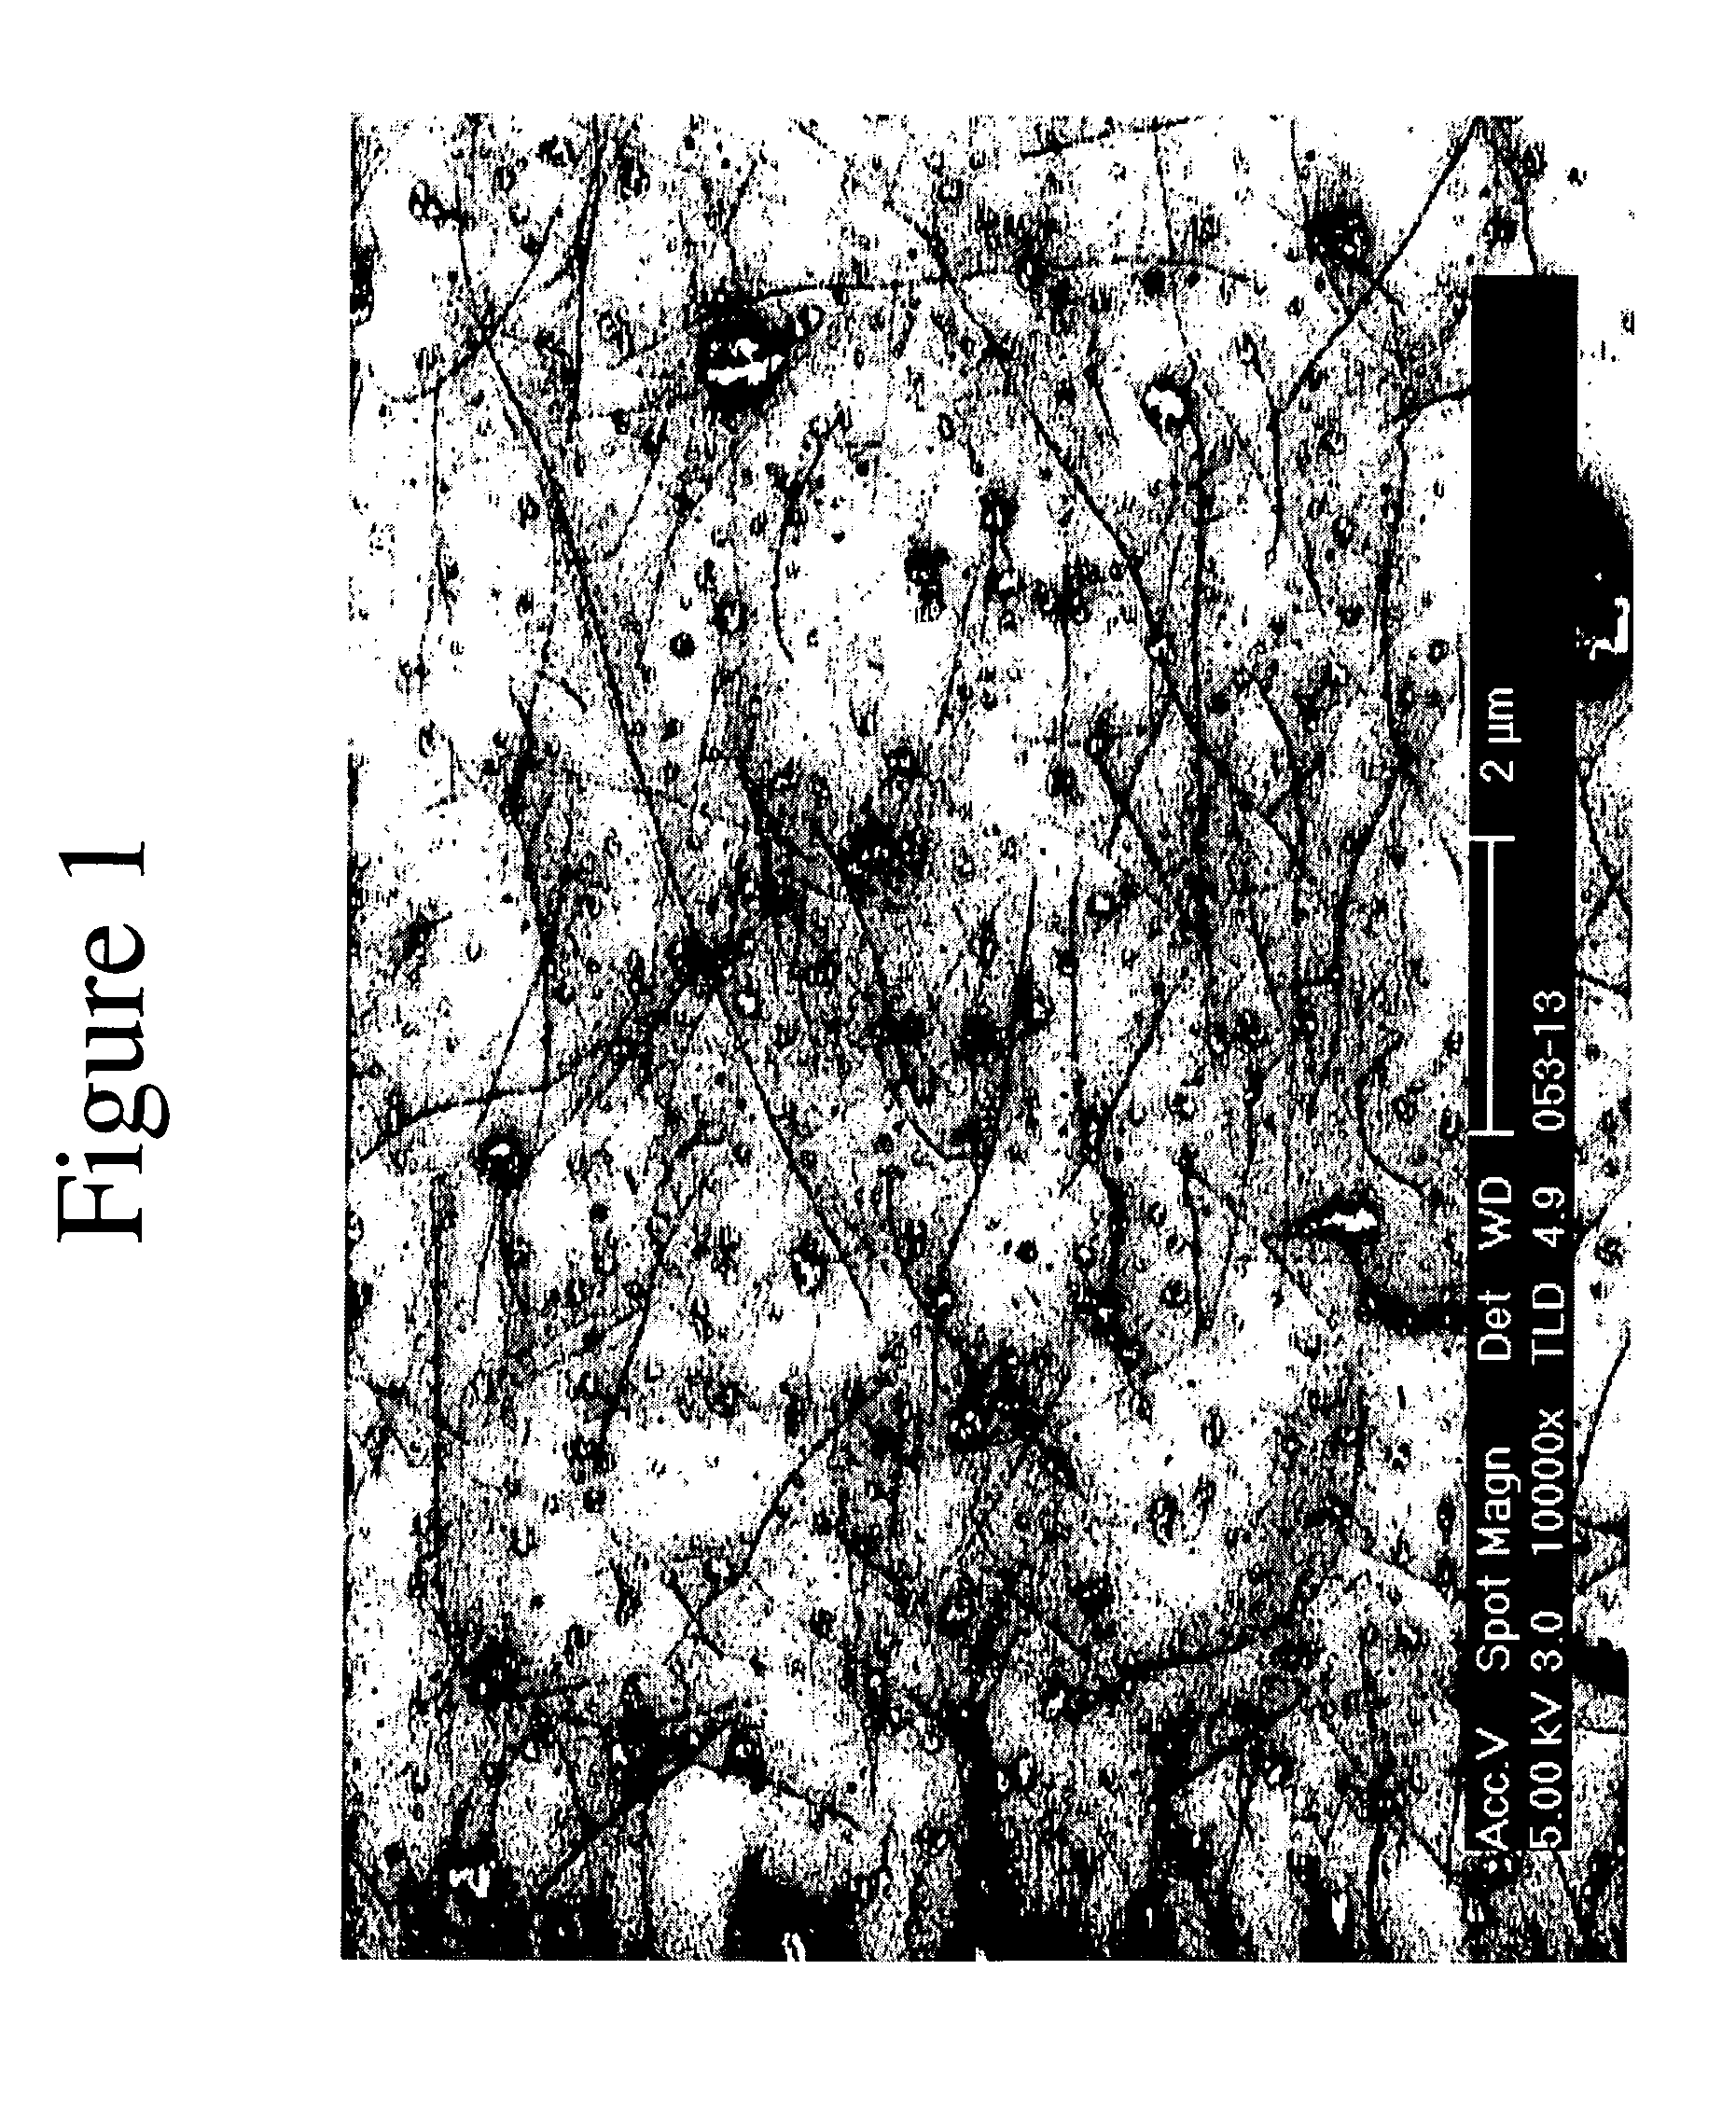 Spin-coatable liquid for use in electronic fabrication processes